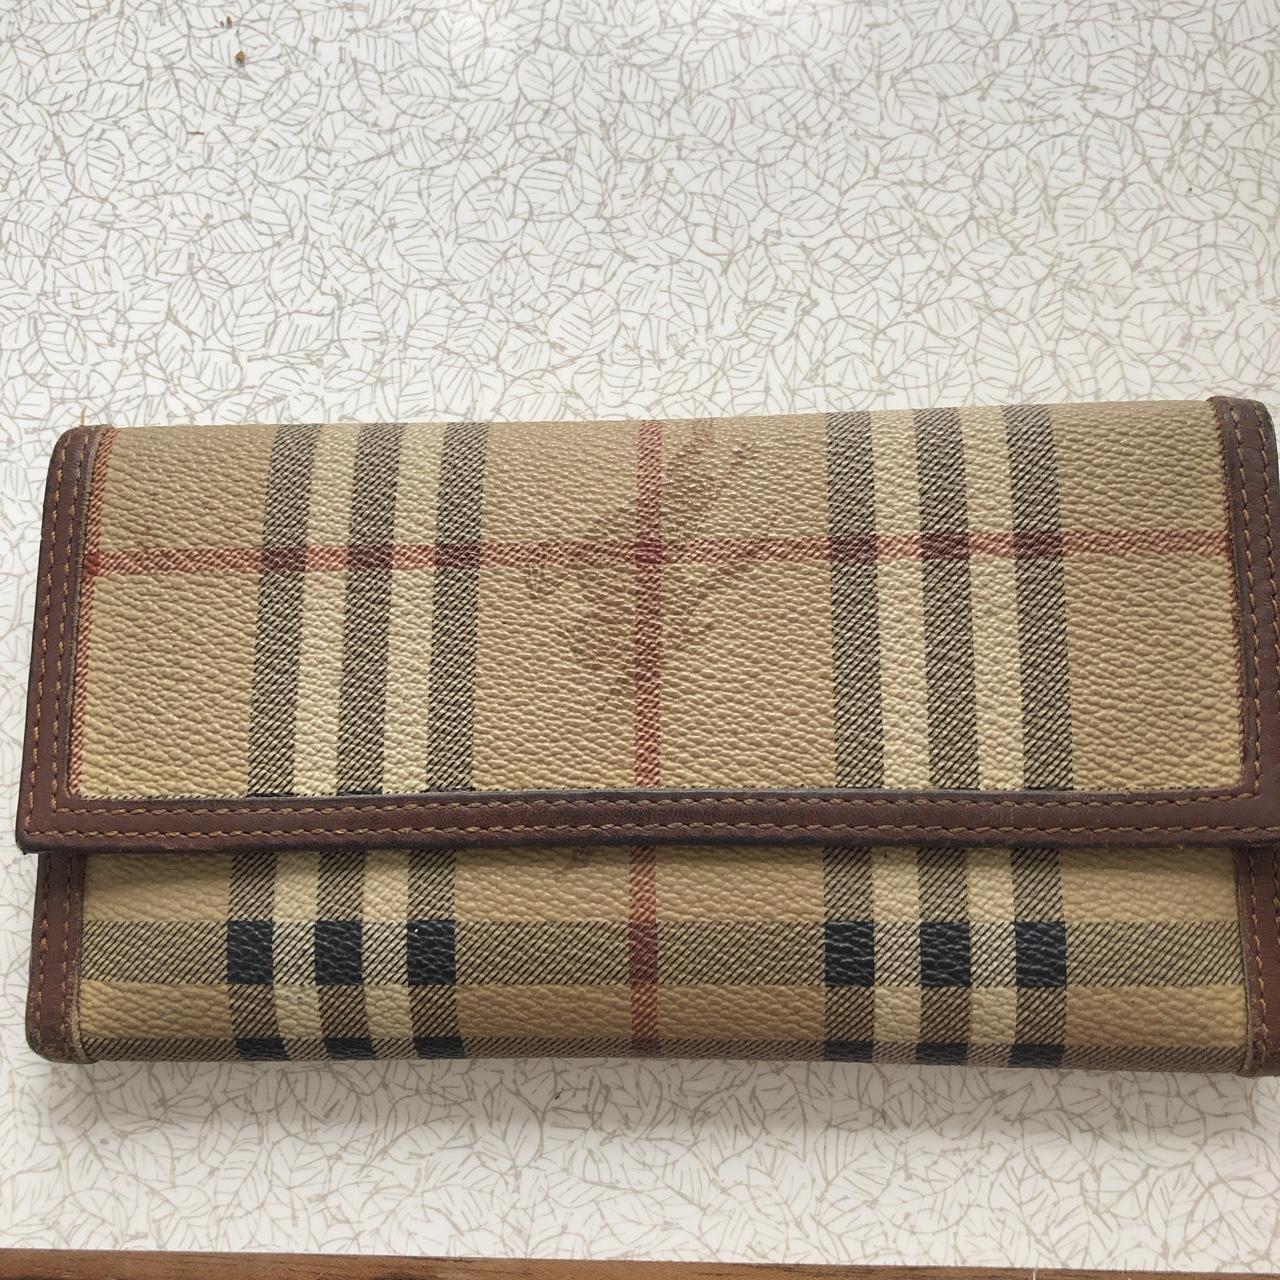 BRAND NEW AUTHENTIC BURBERRY VINTAGE CHECK AND - Depop